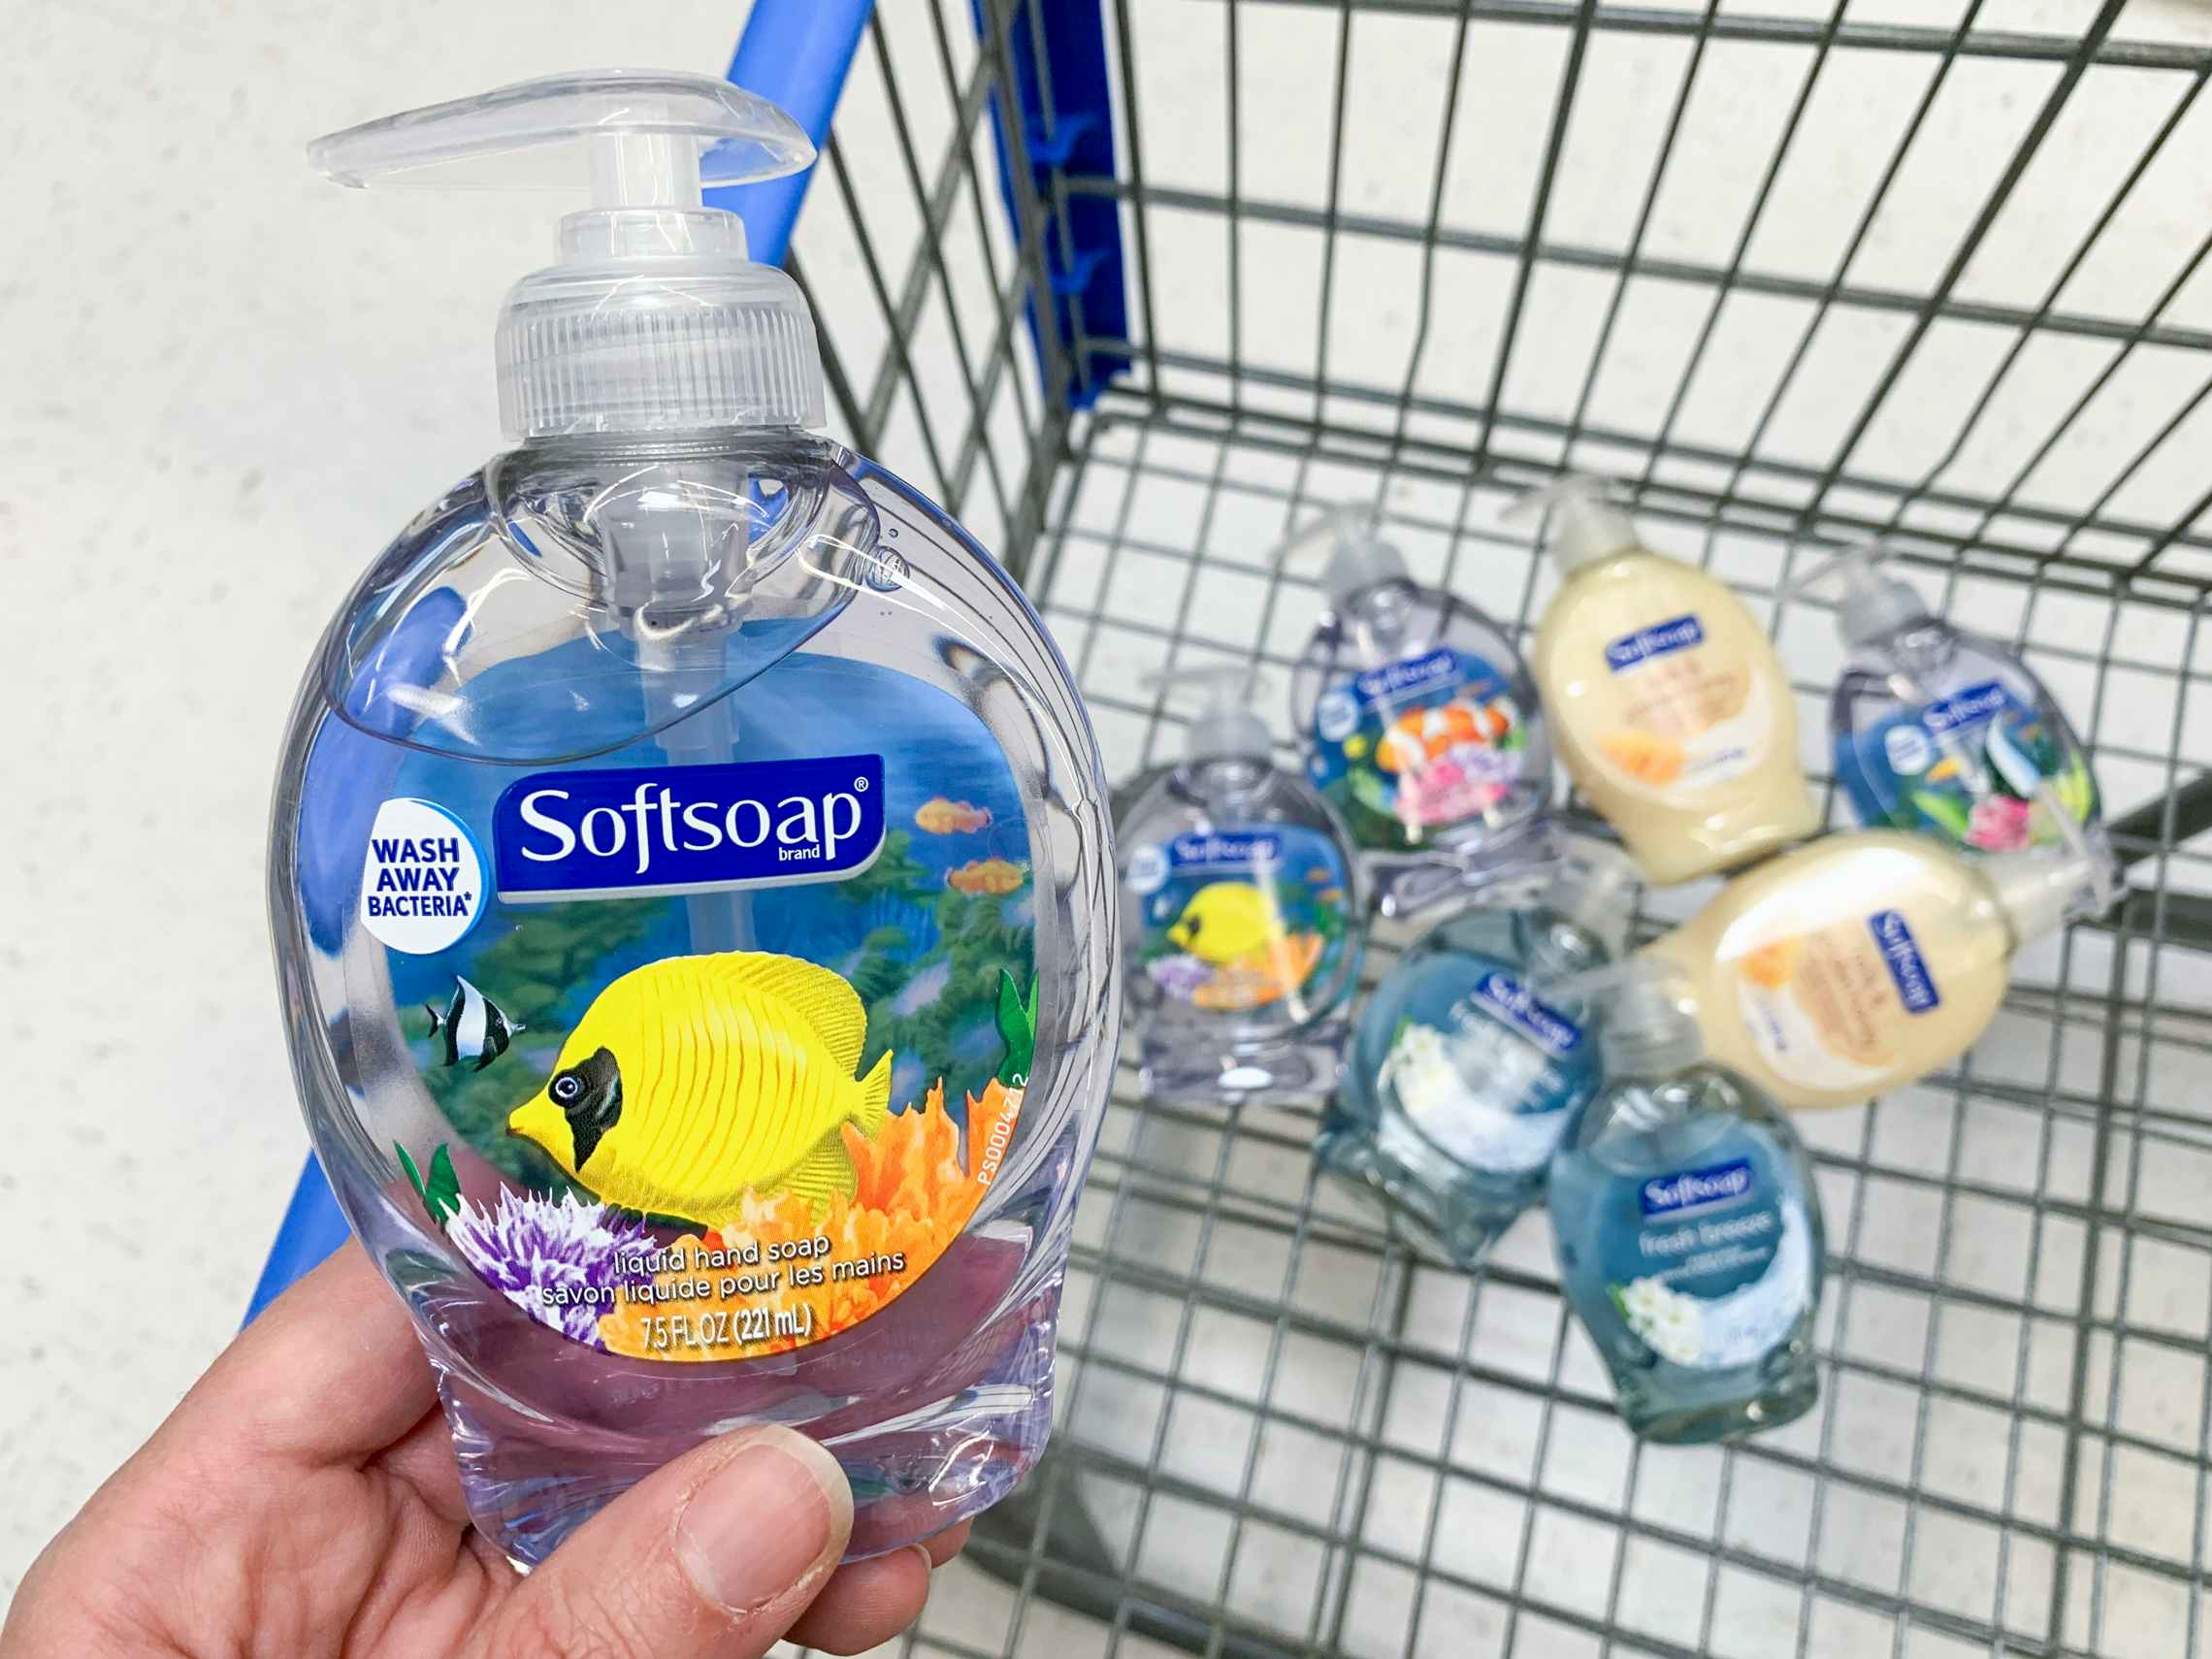 Hand soap held in over a shopping cart filled with the same products. 